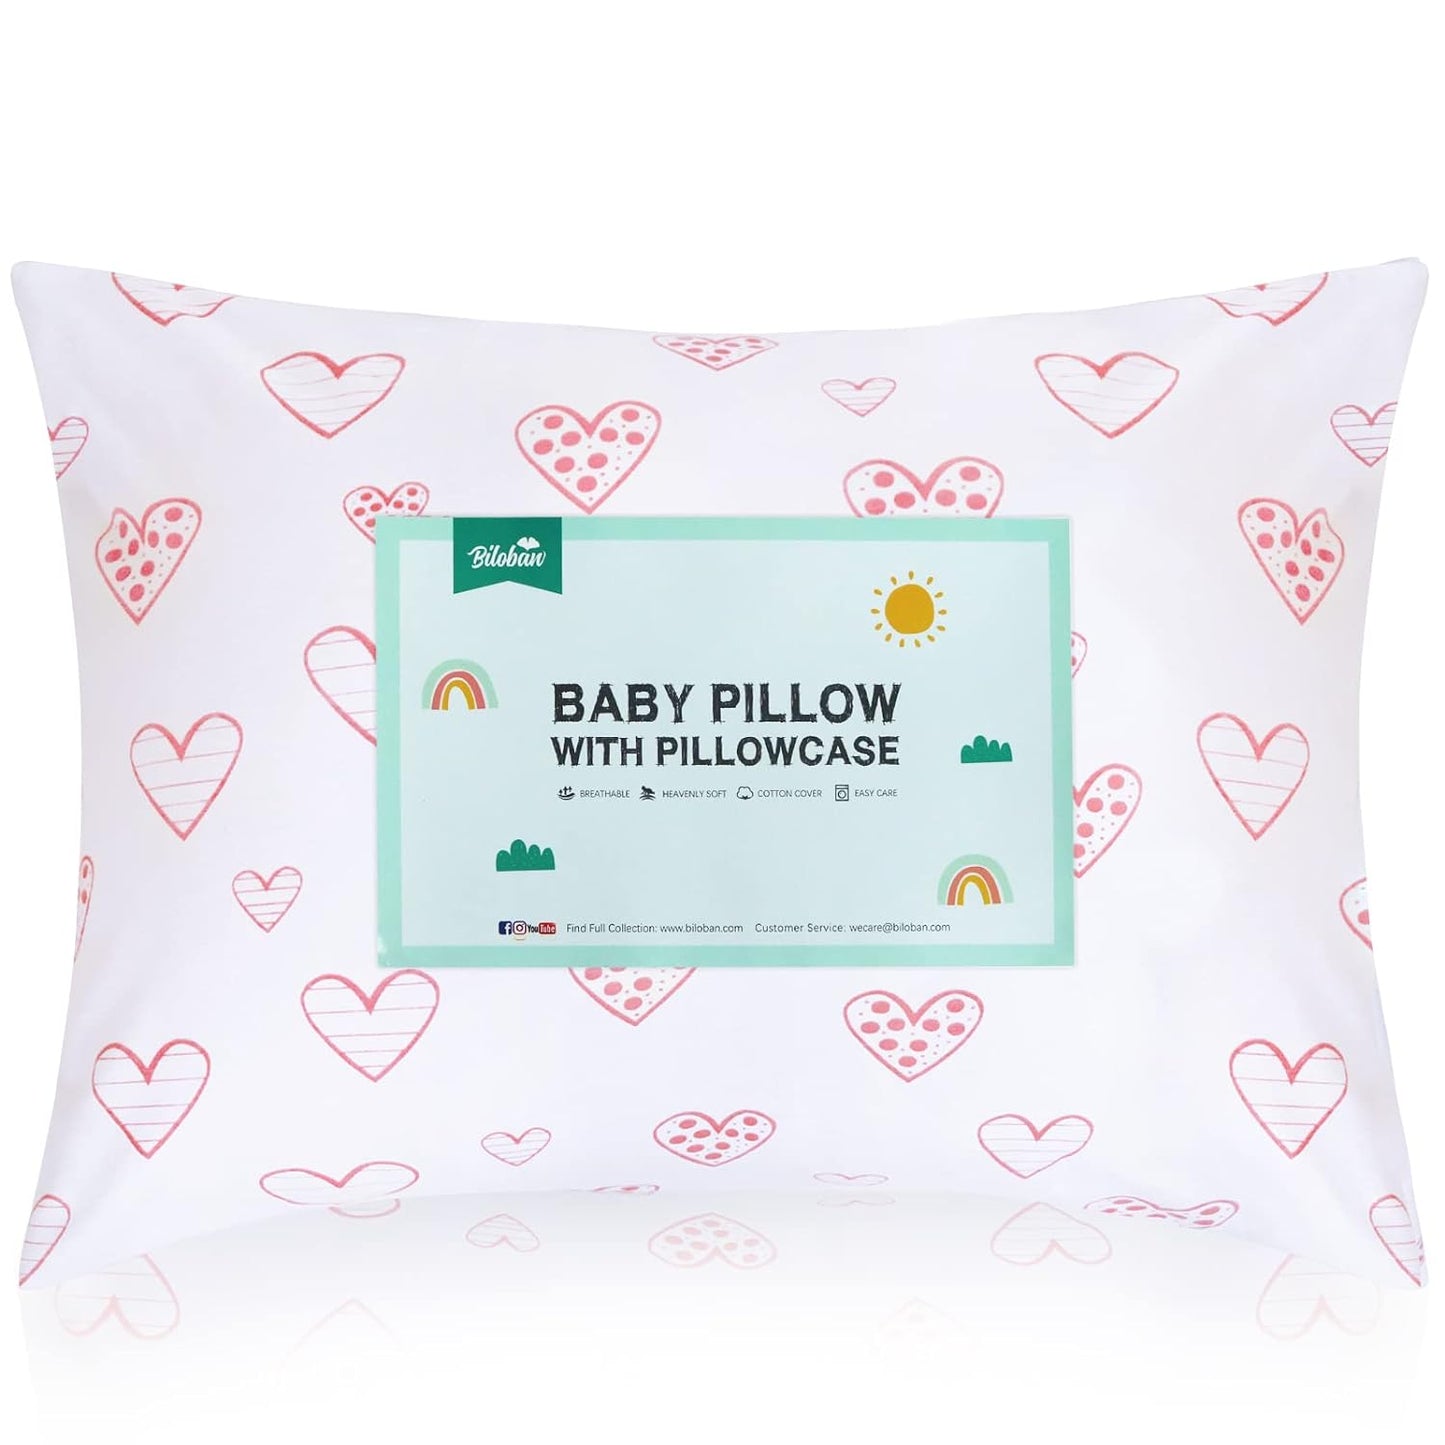 Toddler Pillow with Pillowcase - 14" x 19", 100% Cotton, Multi-Use, Ultra Soft & Breathable, Pink Heart - Biloban Online Store